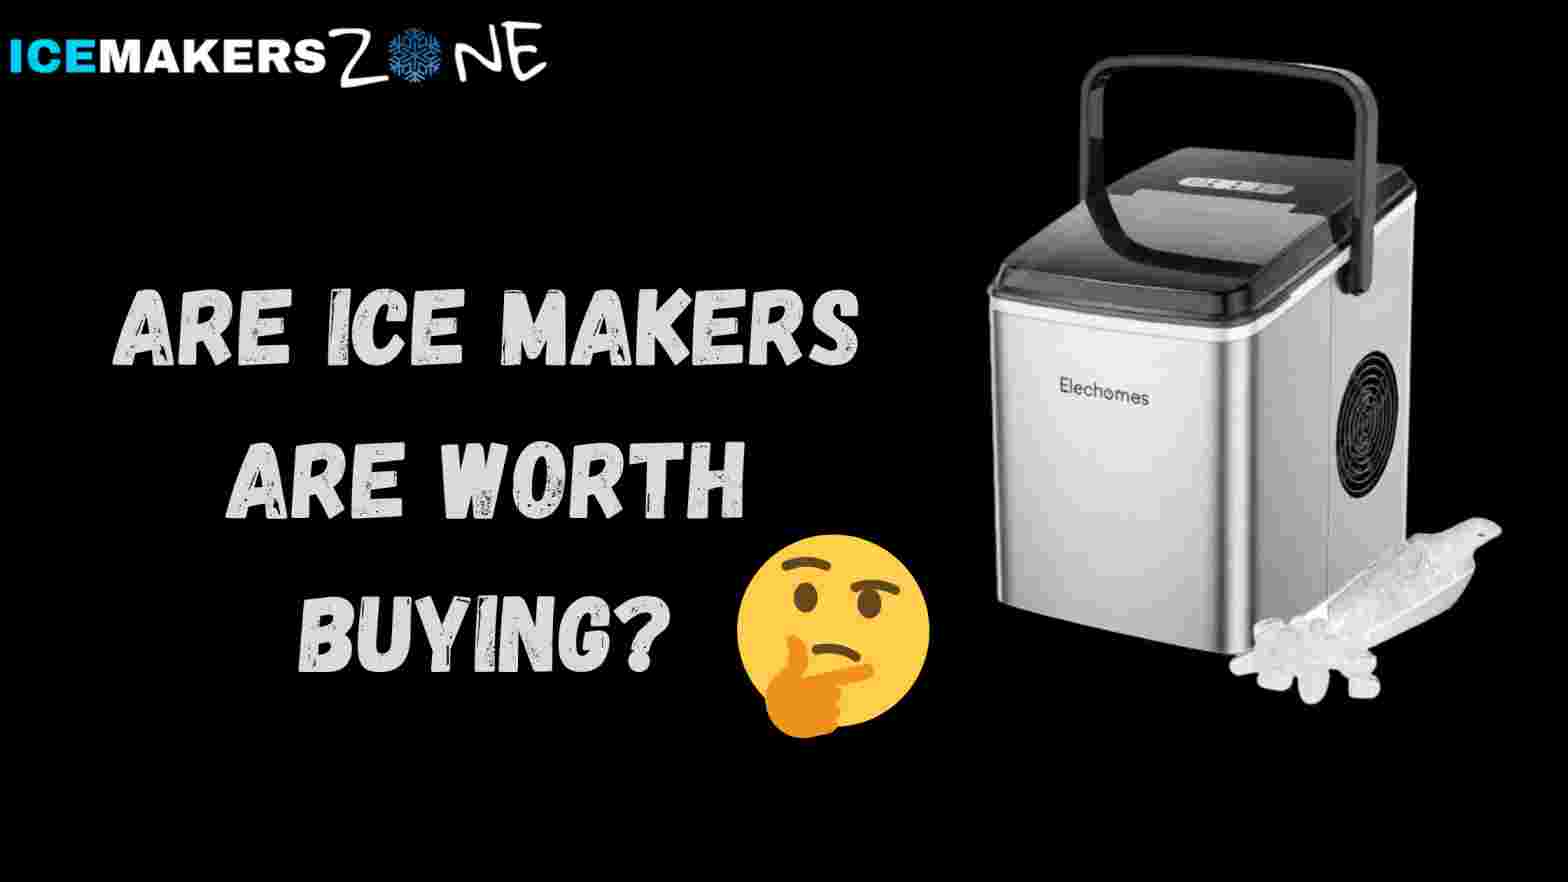 Are Ice makers Worth Buying in 2022 ?